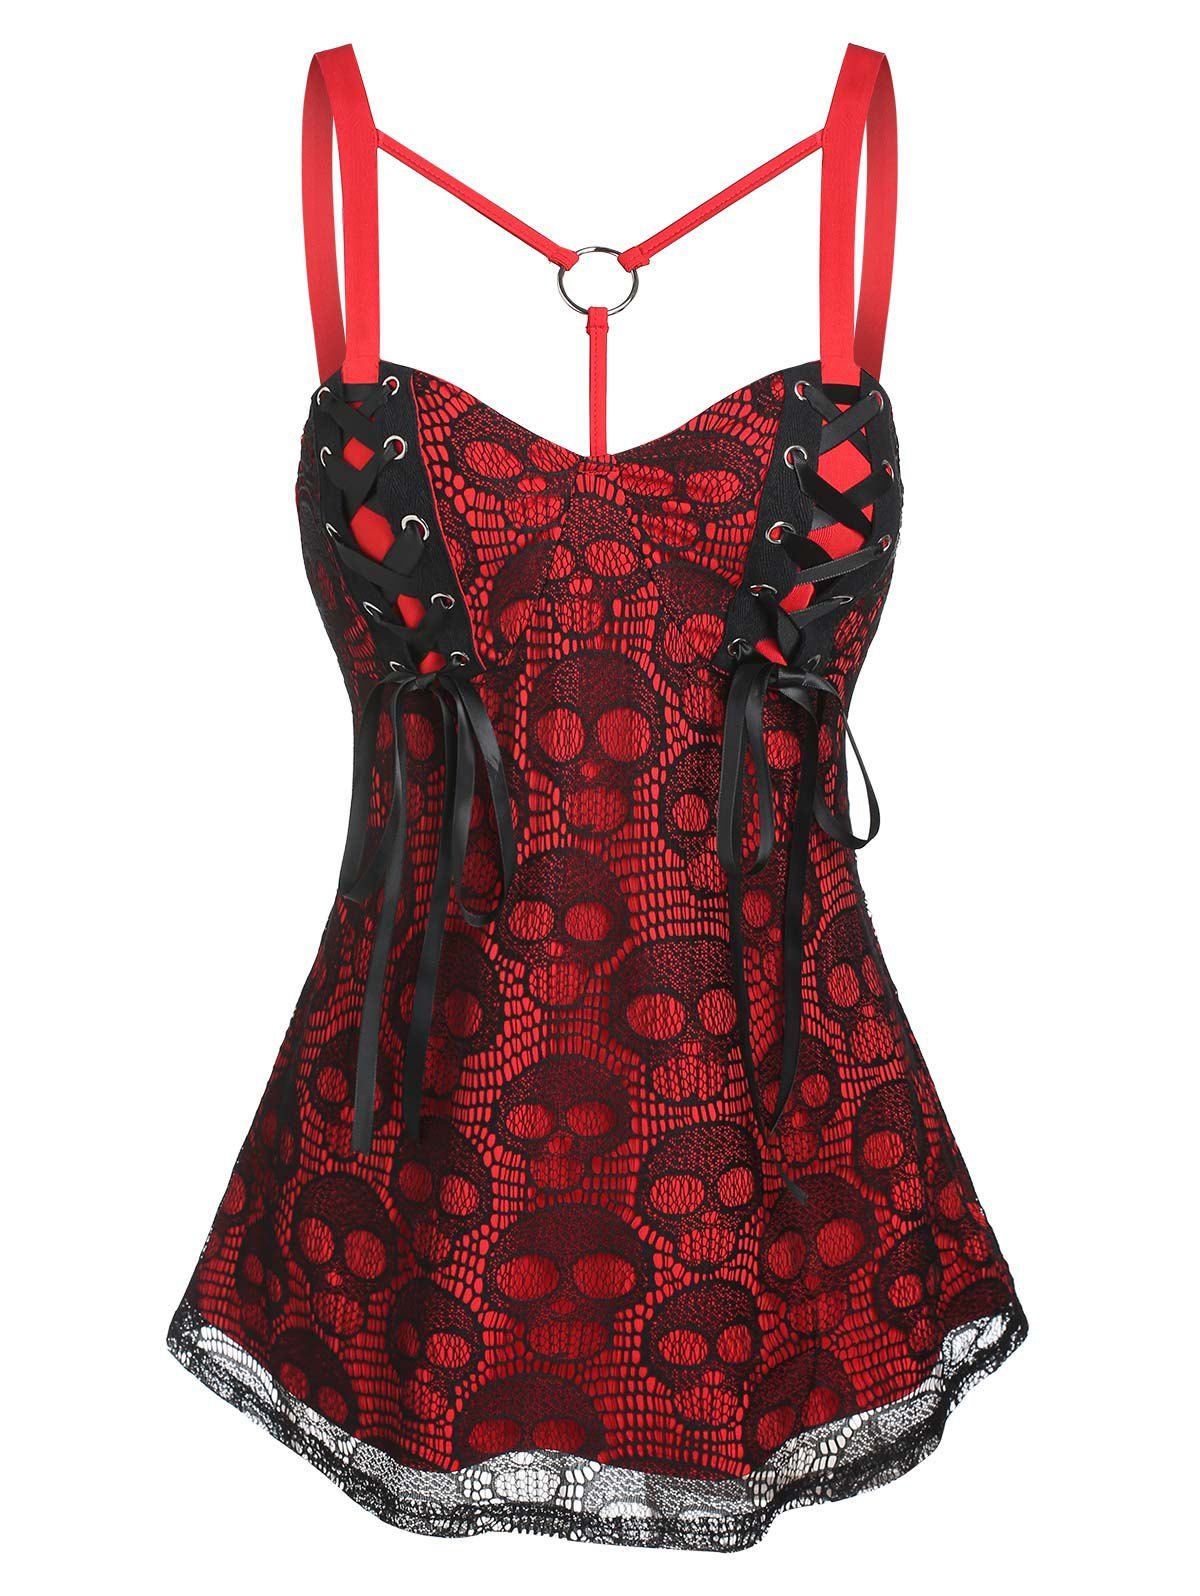 Lace Up Skull Lace Overlay Gothic Tank Top - RED XXXL